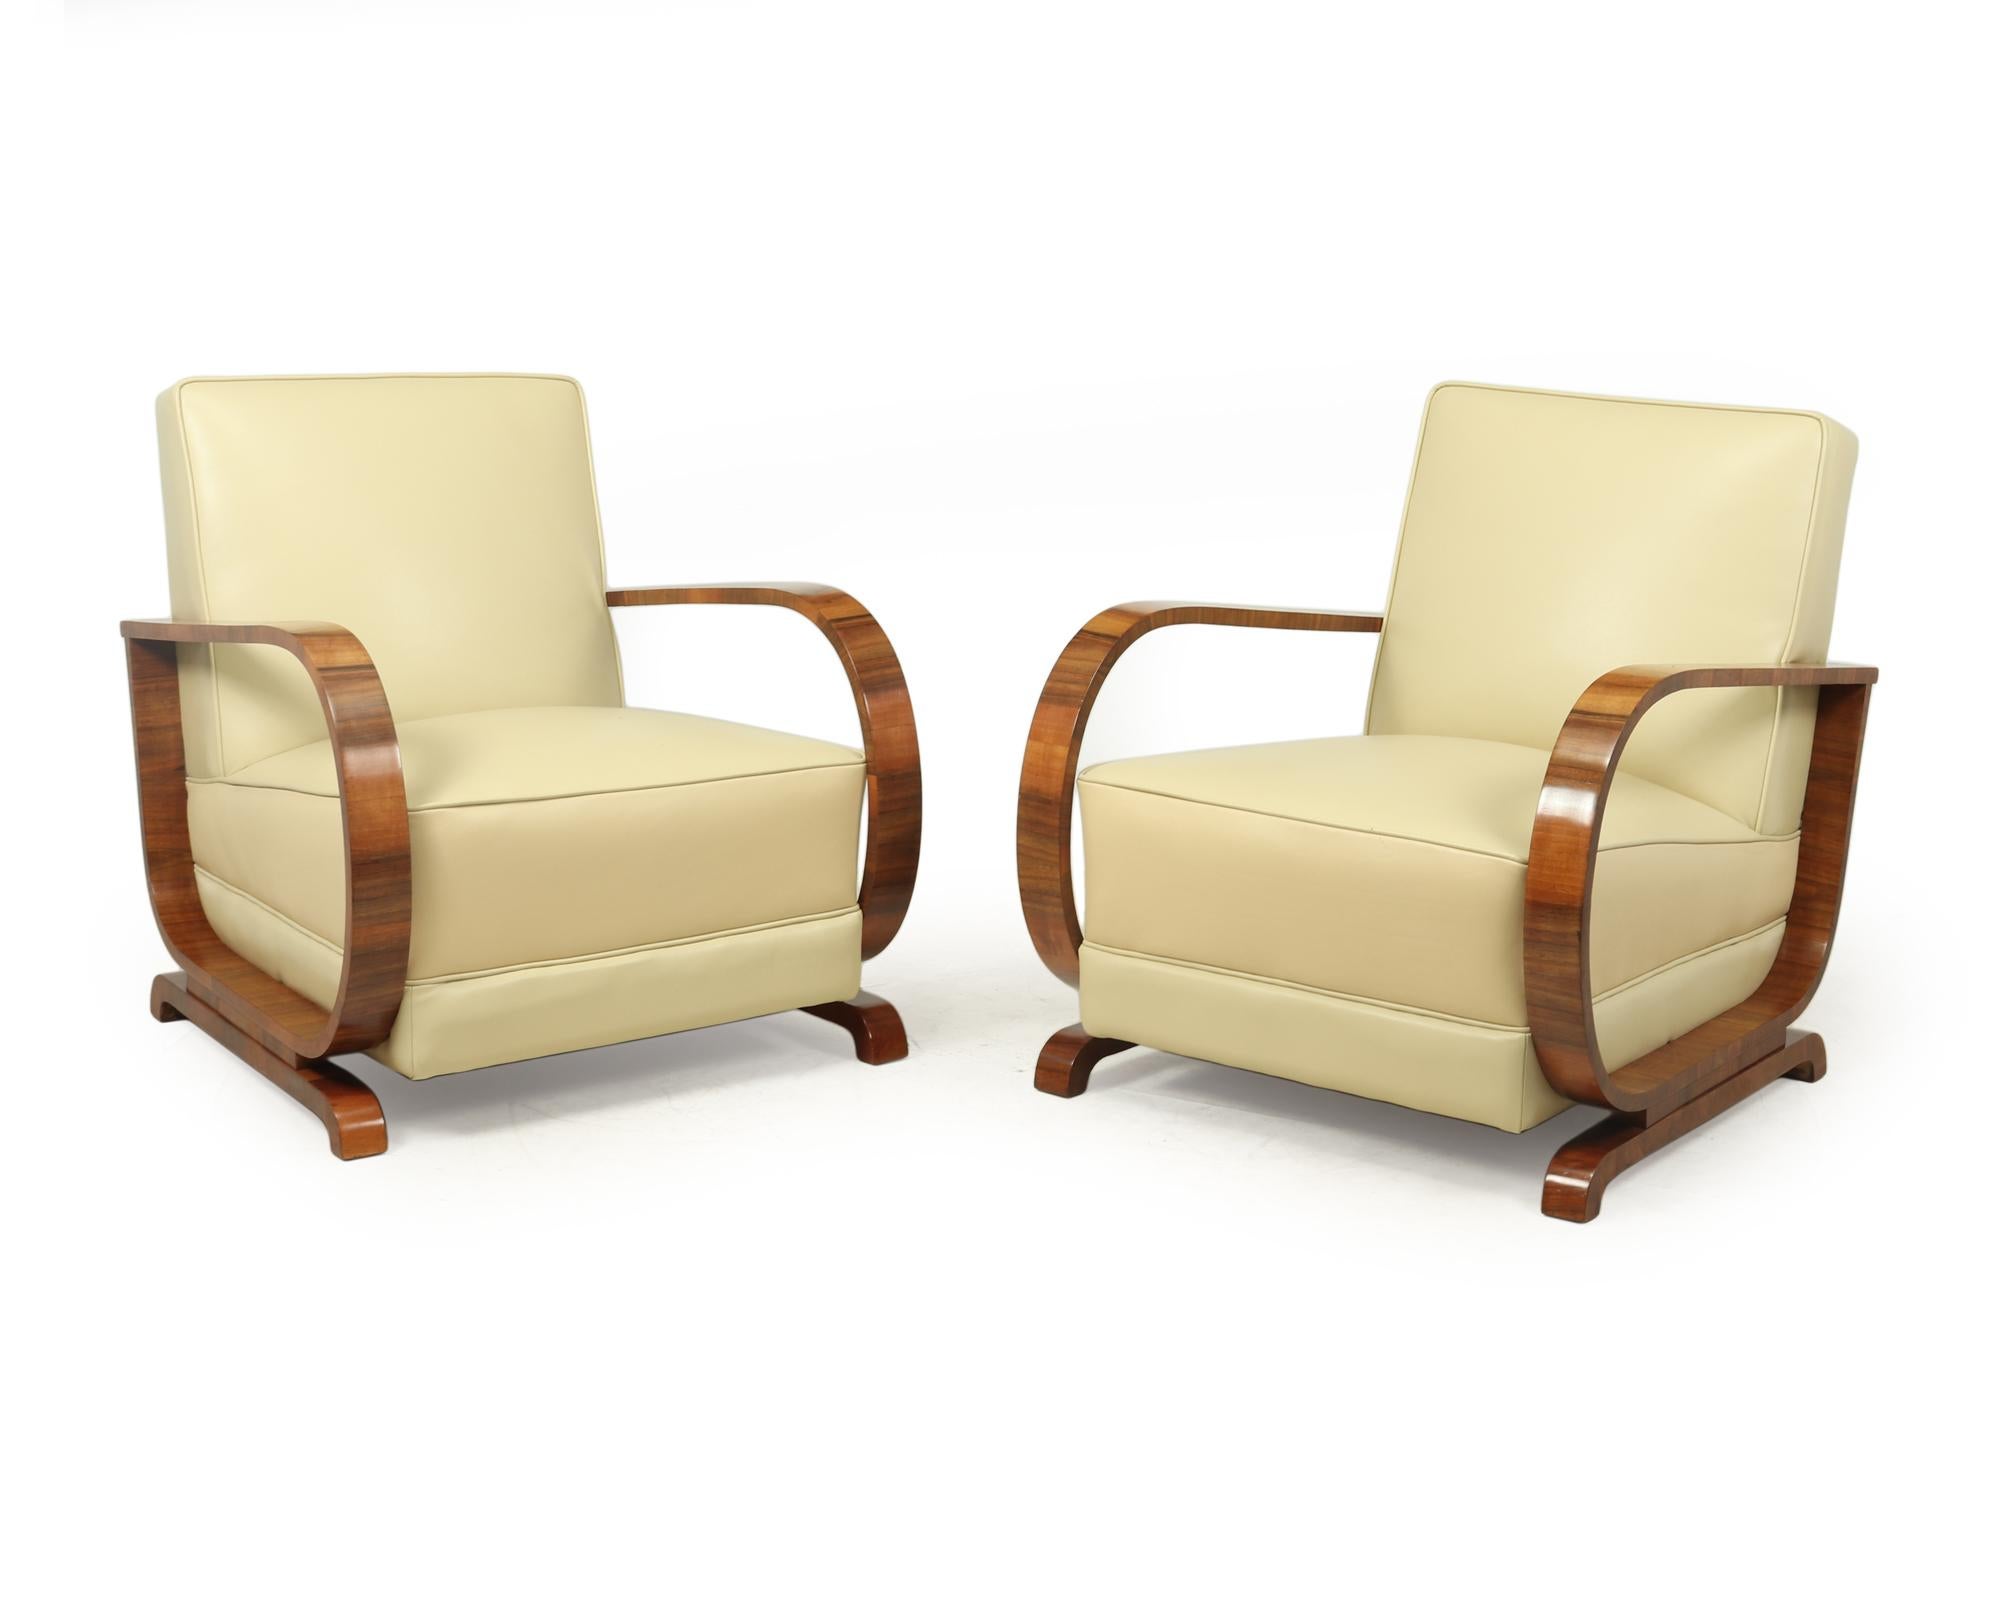 A Pair of Italian Art Deco armchairs produced in Italy in the 1930's, with hooped arms sprung seat and back, these chairs have been fully reupholstered in thick hide leather and the show wood has been professionally hand polished

Age: